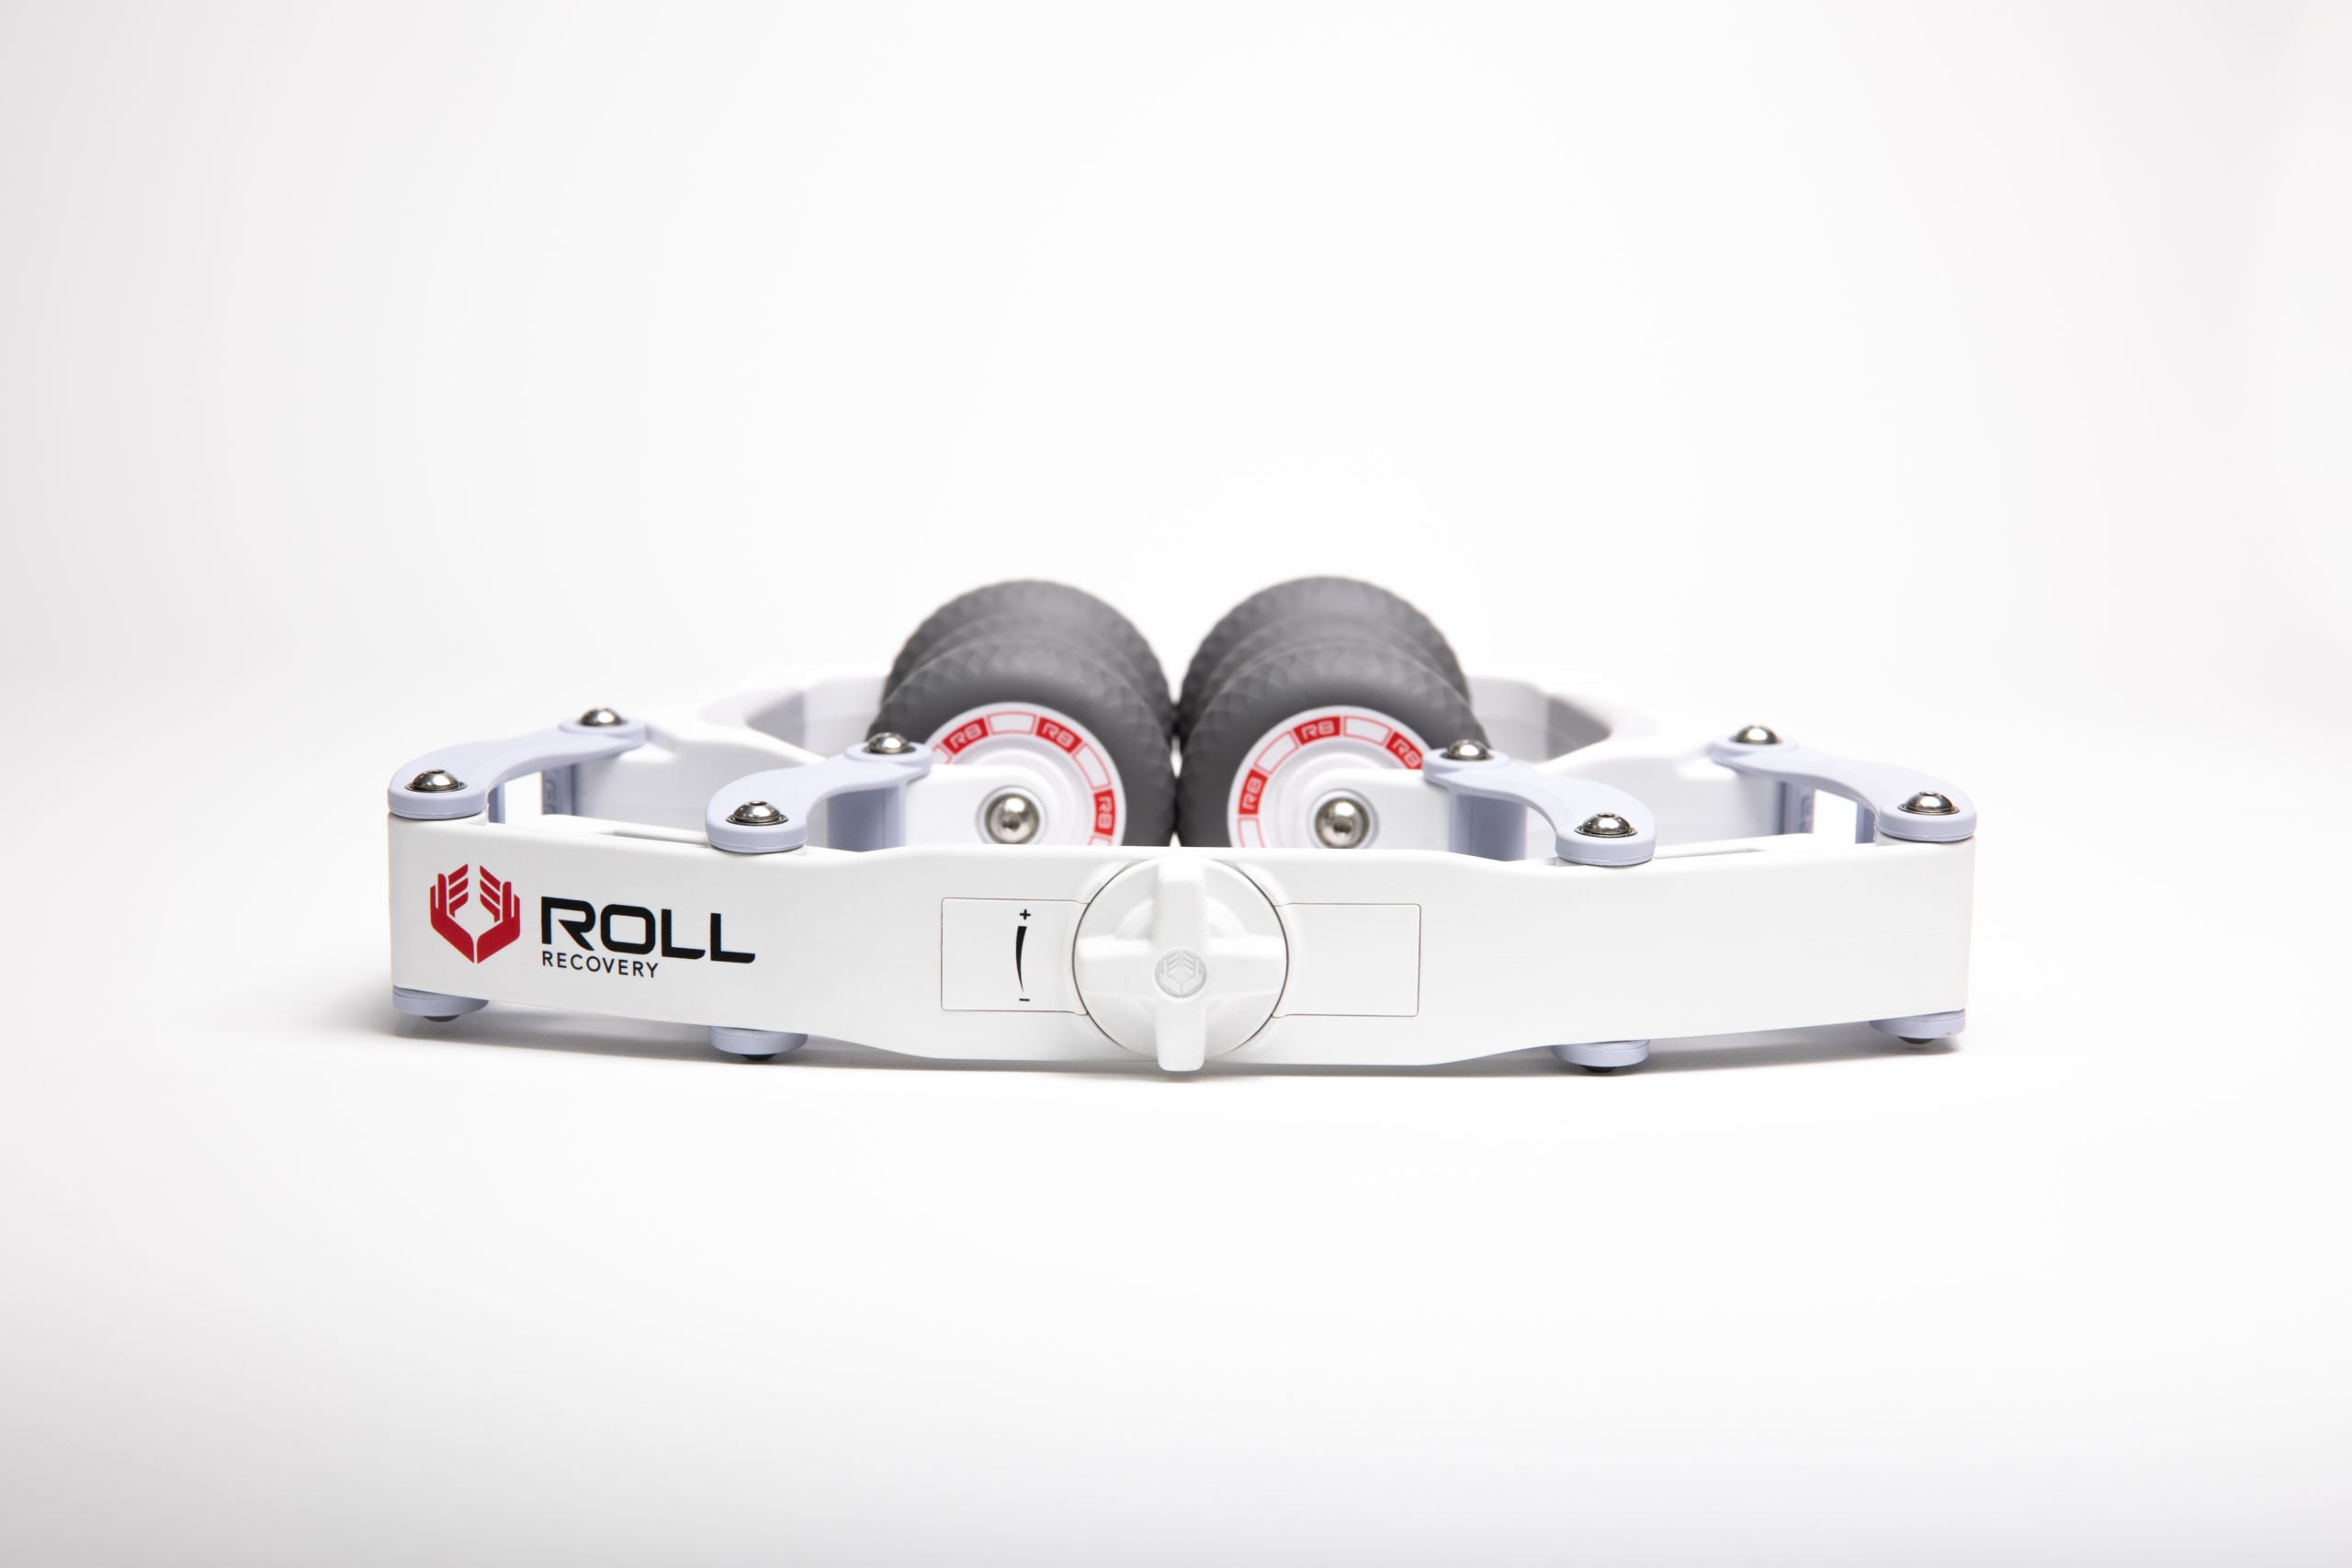 Introducing The R8 Plus Roll Recovery